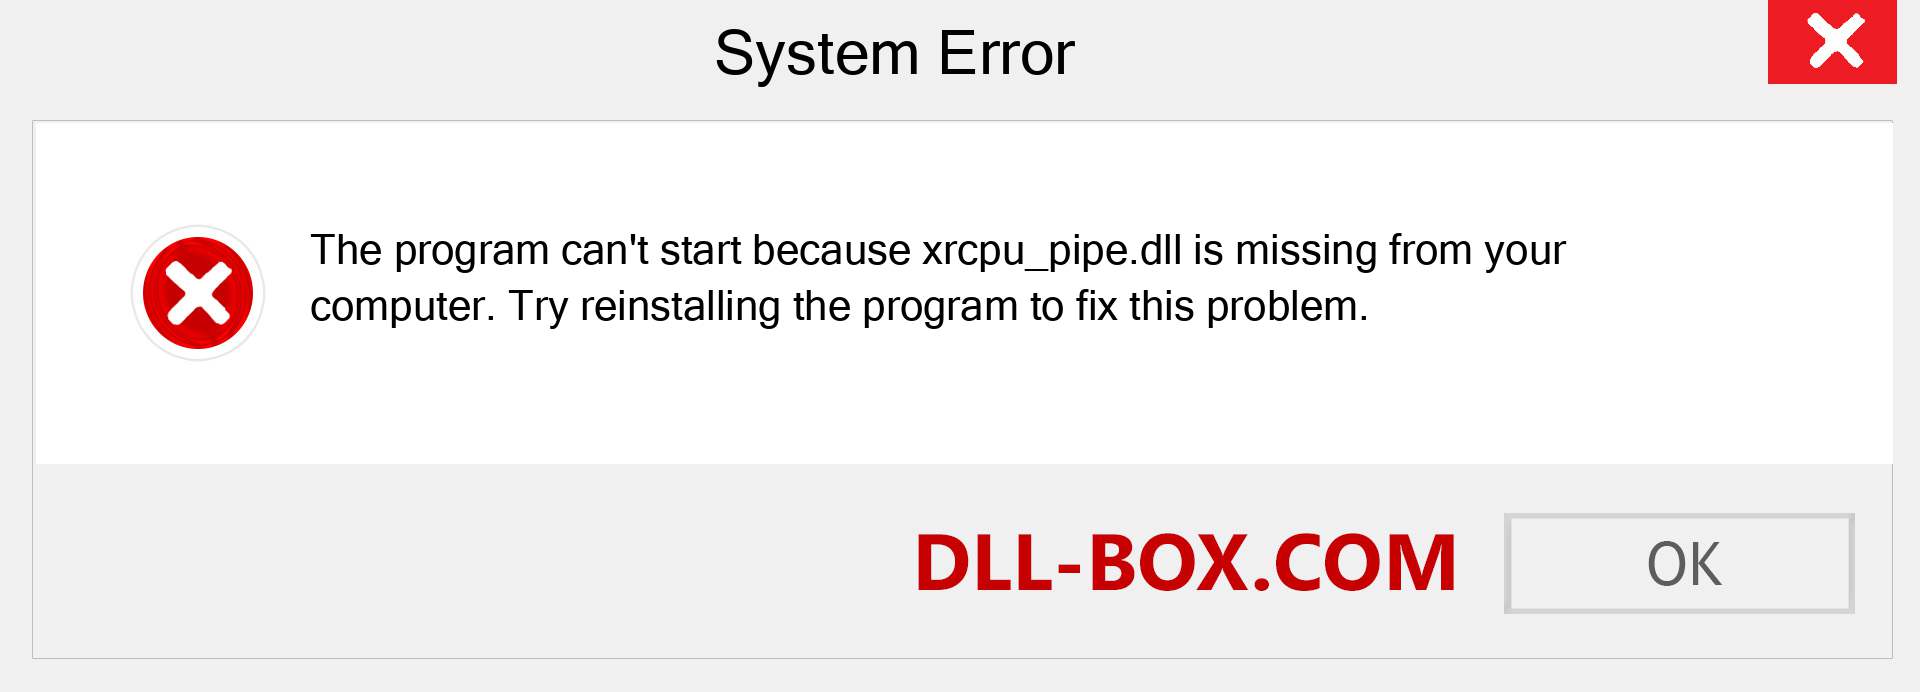  xrcpu_pipe.dll file is missing?. Download for Windows 7, 8, 10 - Fix  xrcpu_pipe dll Missing Error on Windows, photos, images